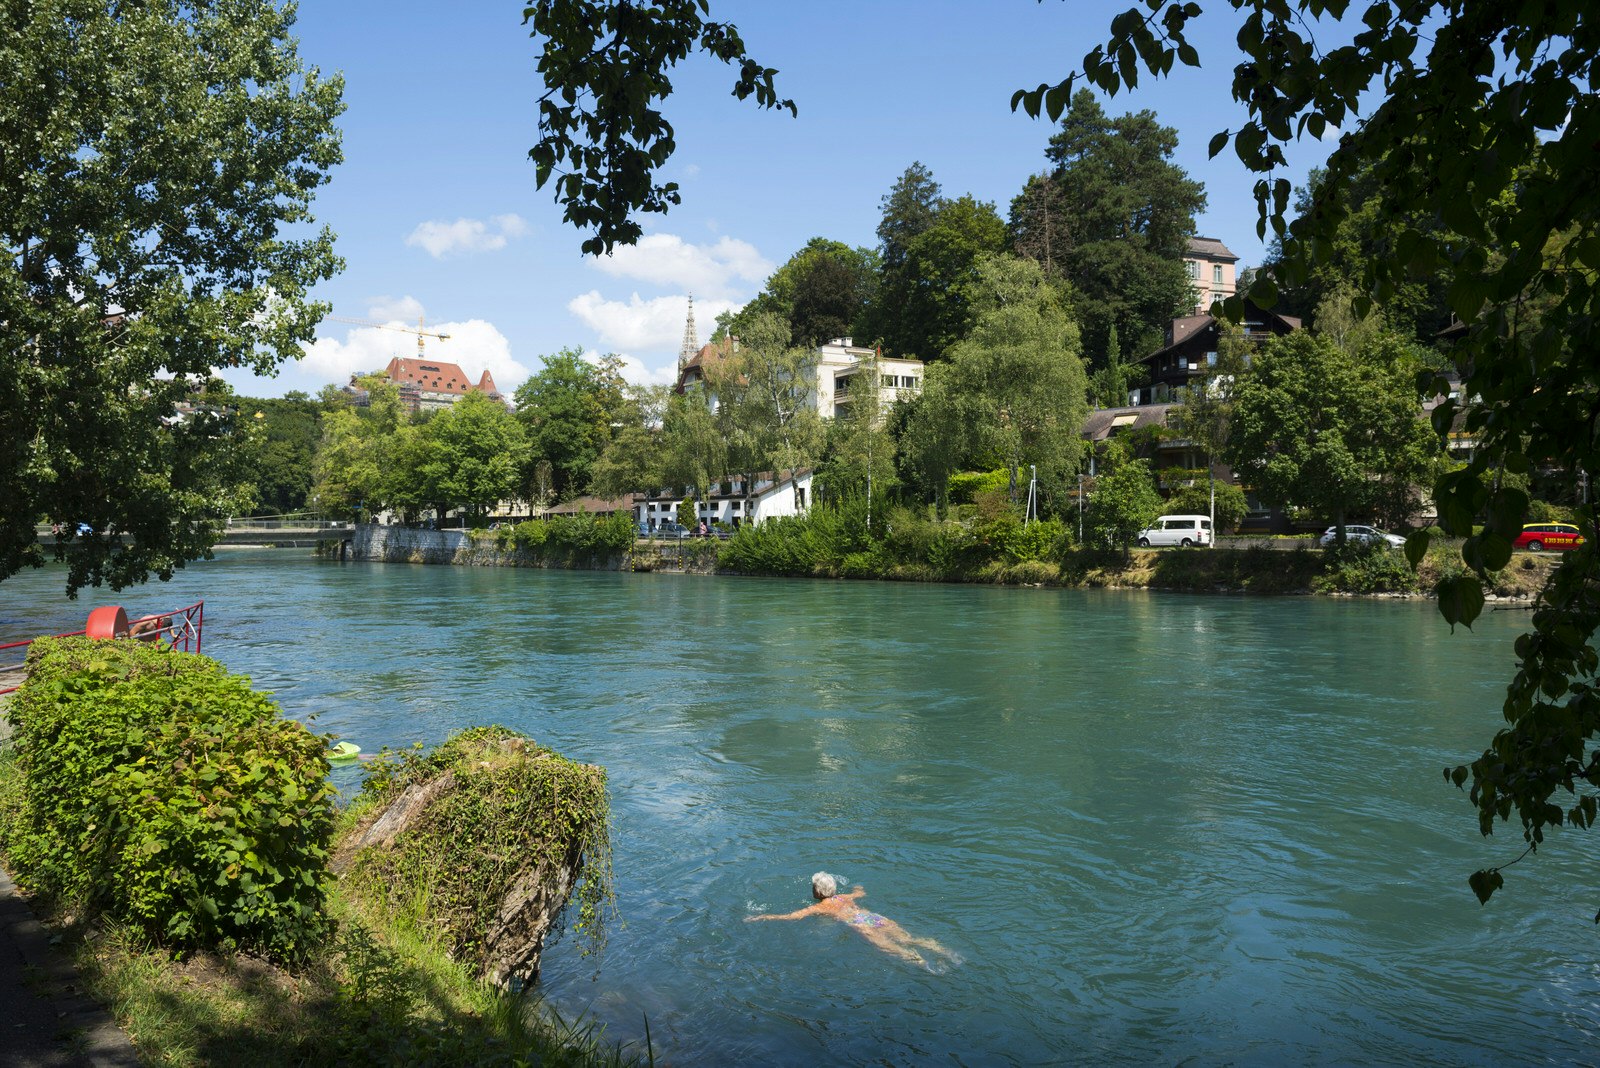 A person floats down the Aare river in the historical city of Bern on a sunny day